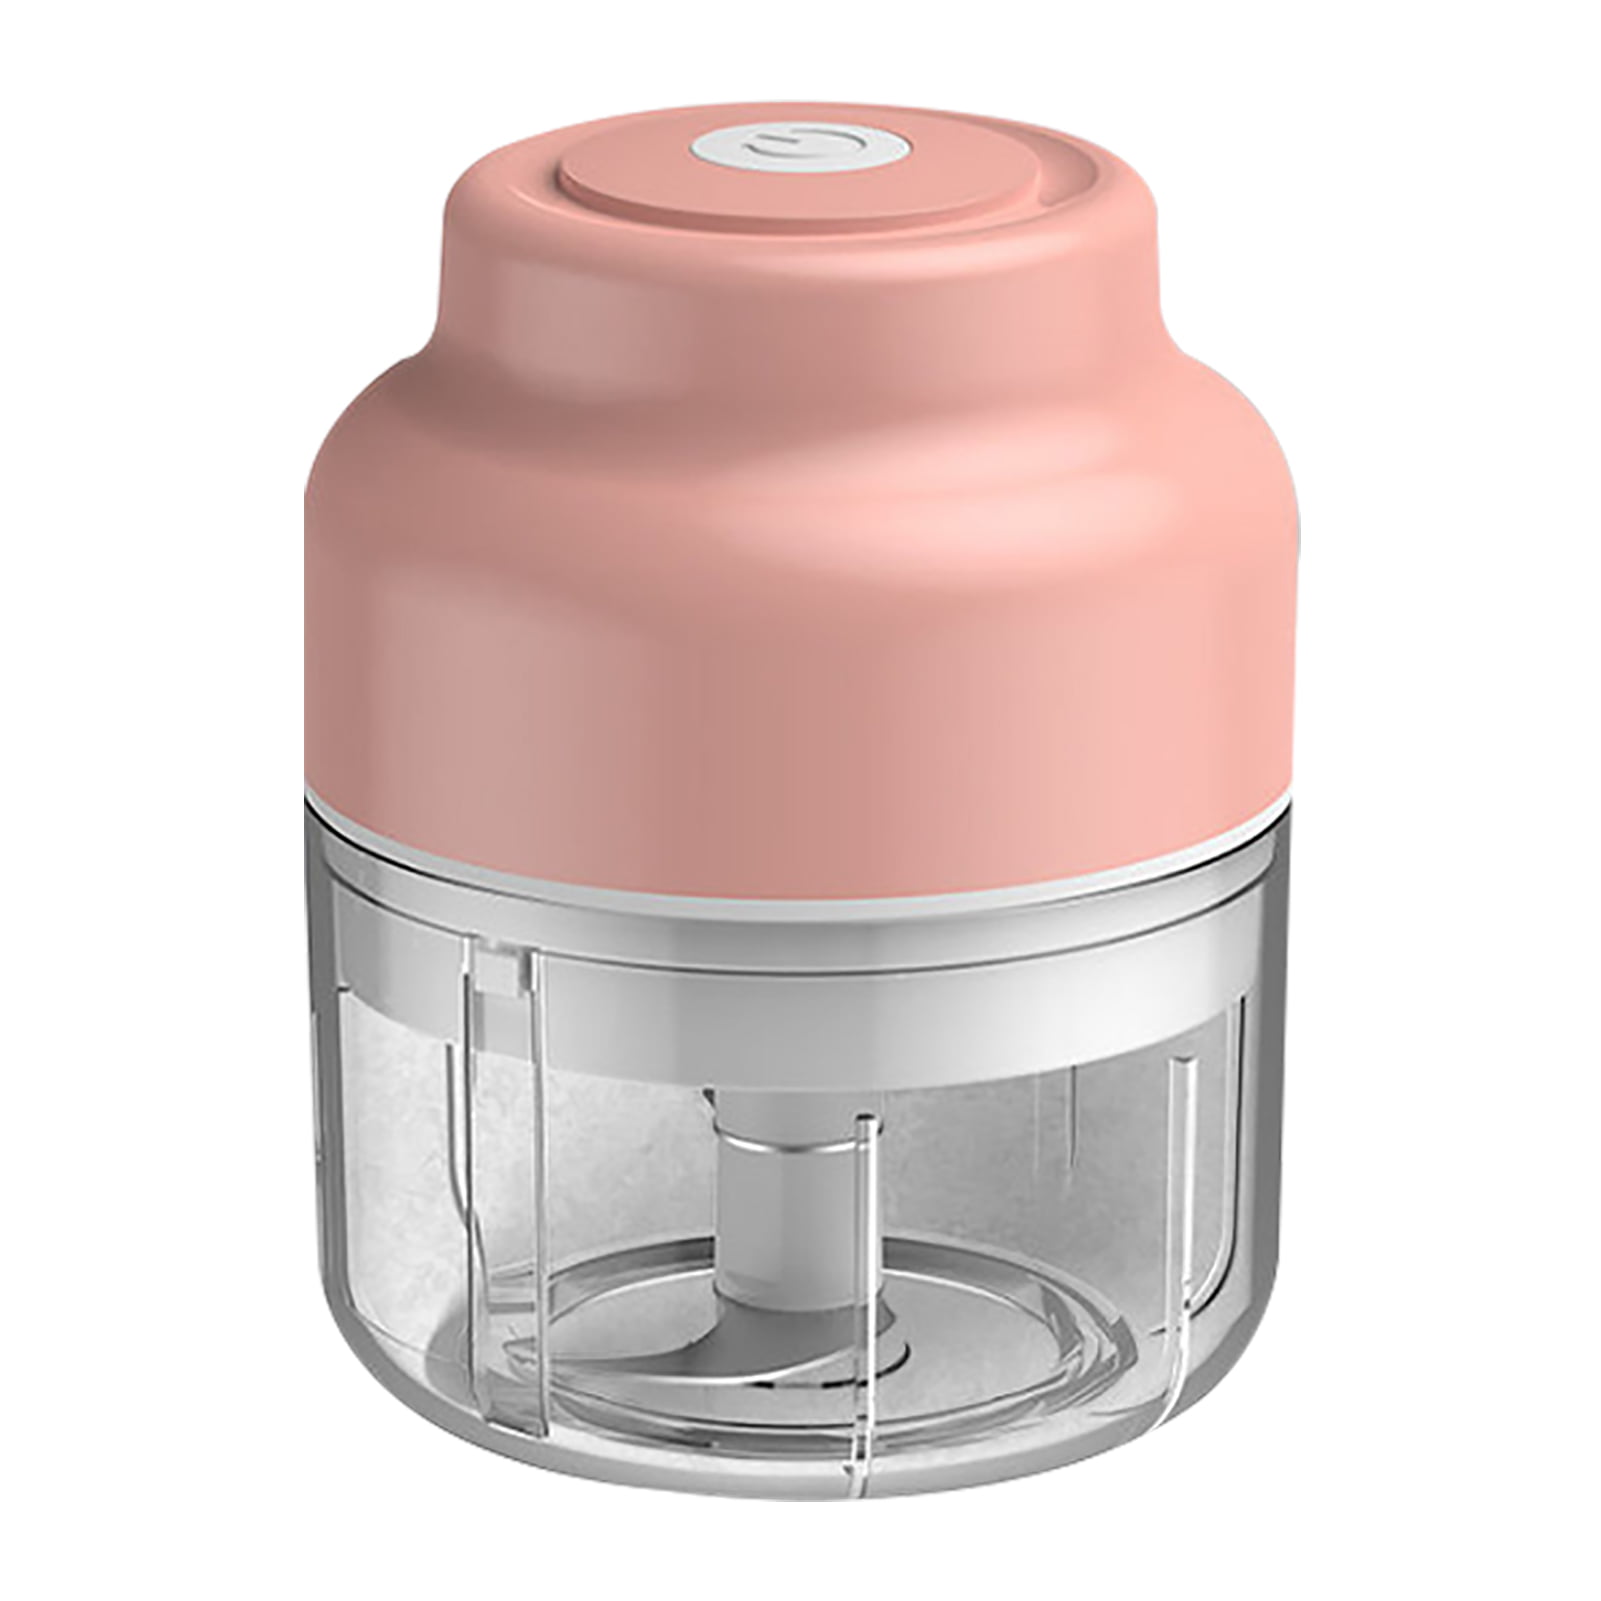 Details about   Electric Mini Garlic Chopper Masher Portable Small Food Processor Mincer Grinder 